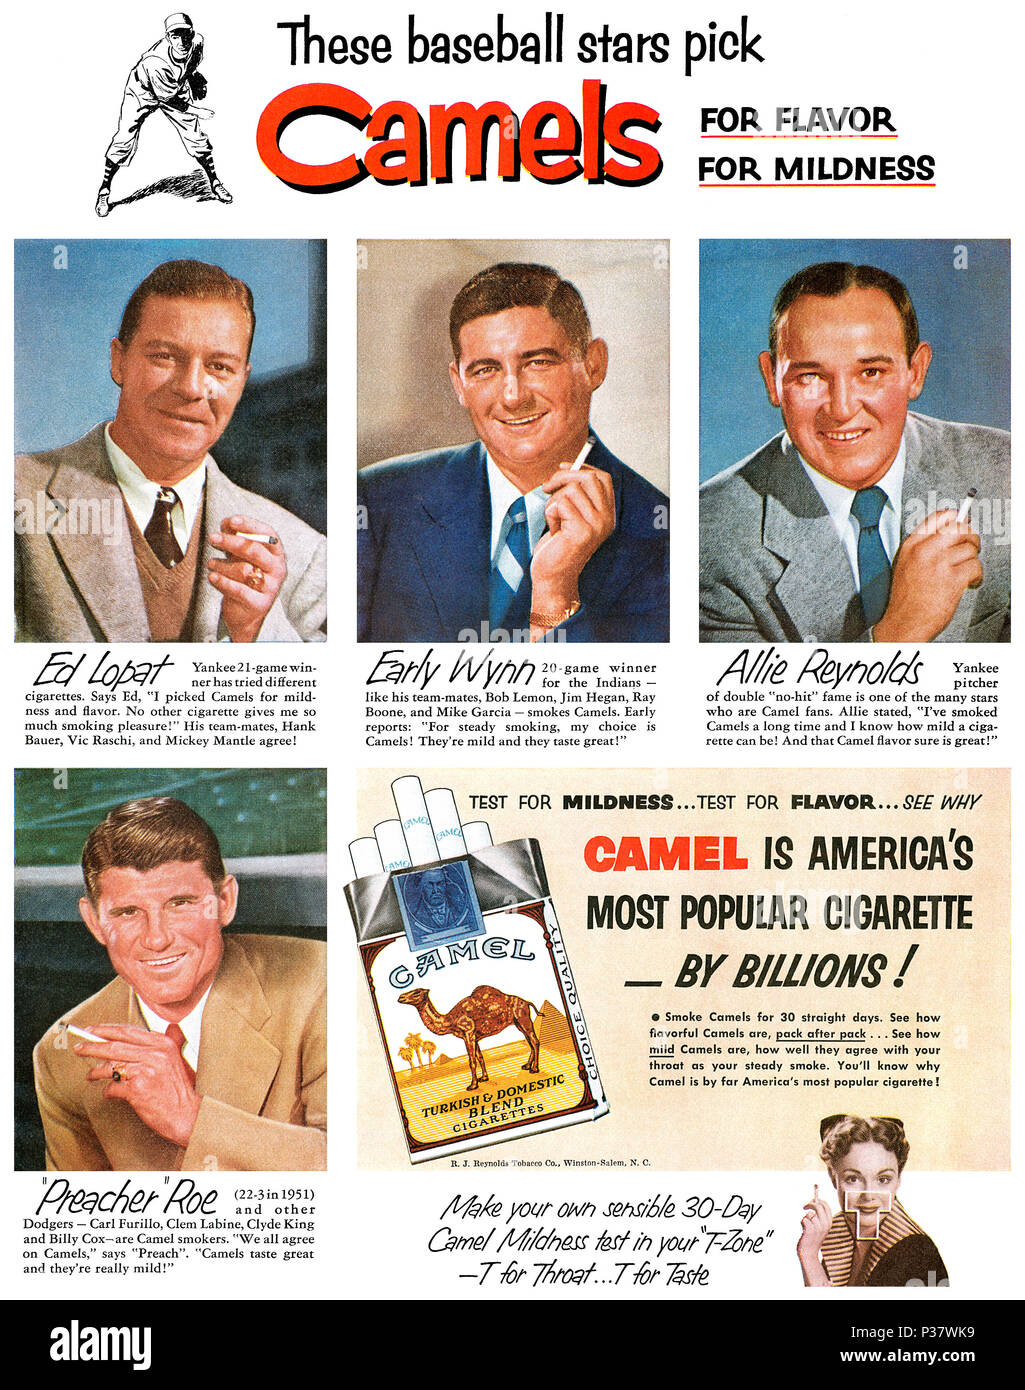 1952 U.S. advertisement for Camel cigarettes, featuring baseball stars Ed Lopat, Early Wynn, Allie Reynolds and 'Preacher' Roe. Stock Photo